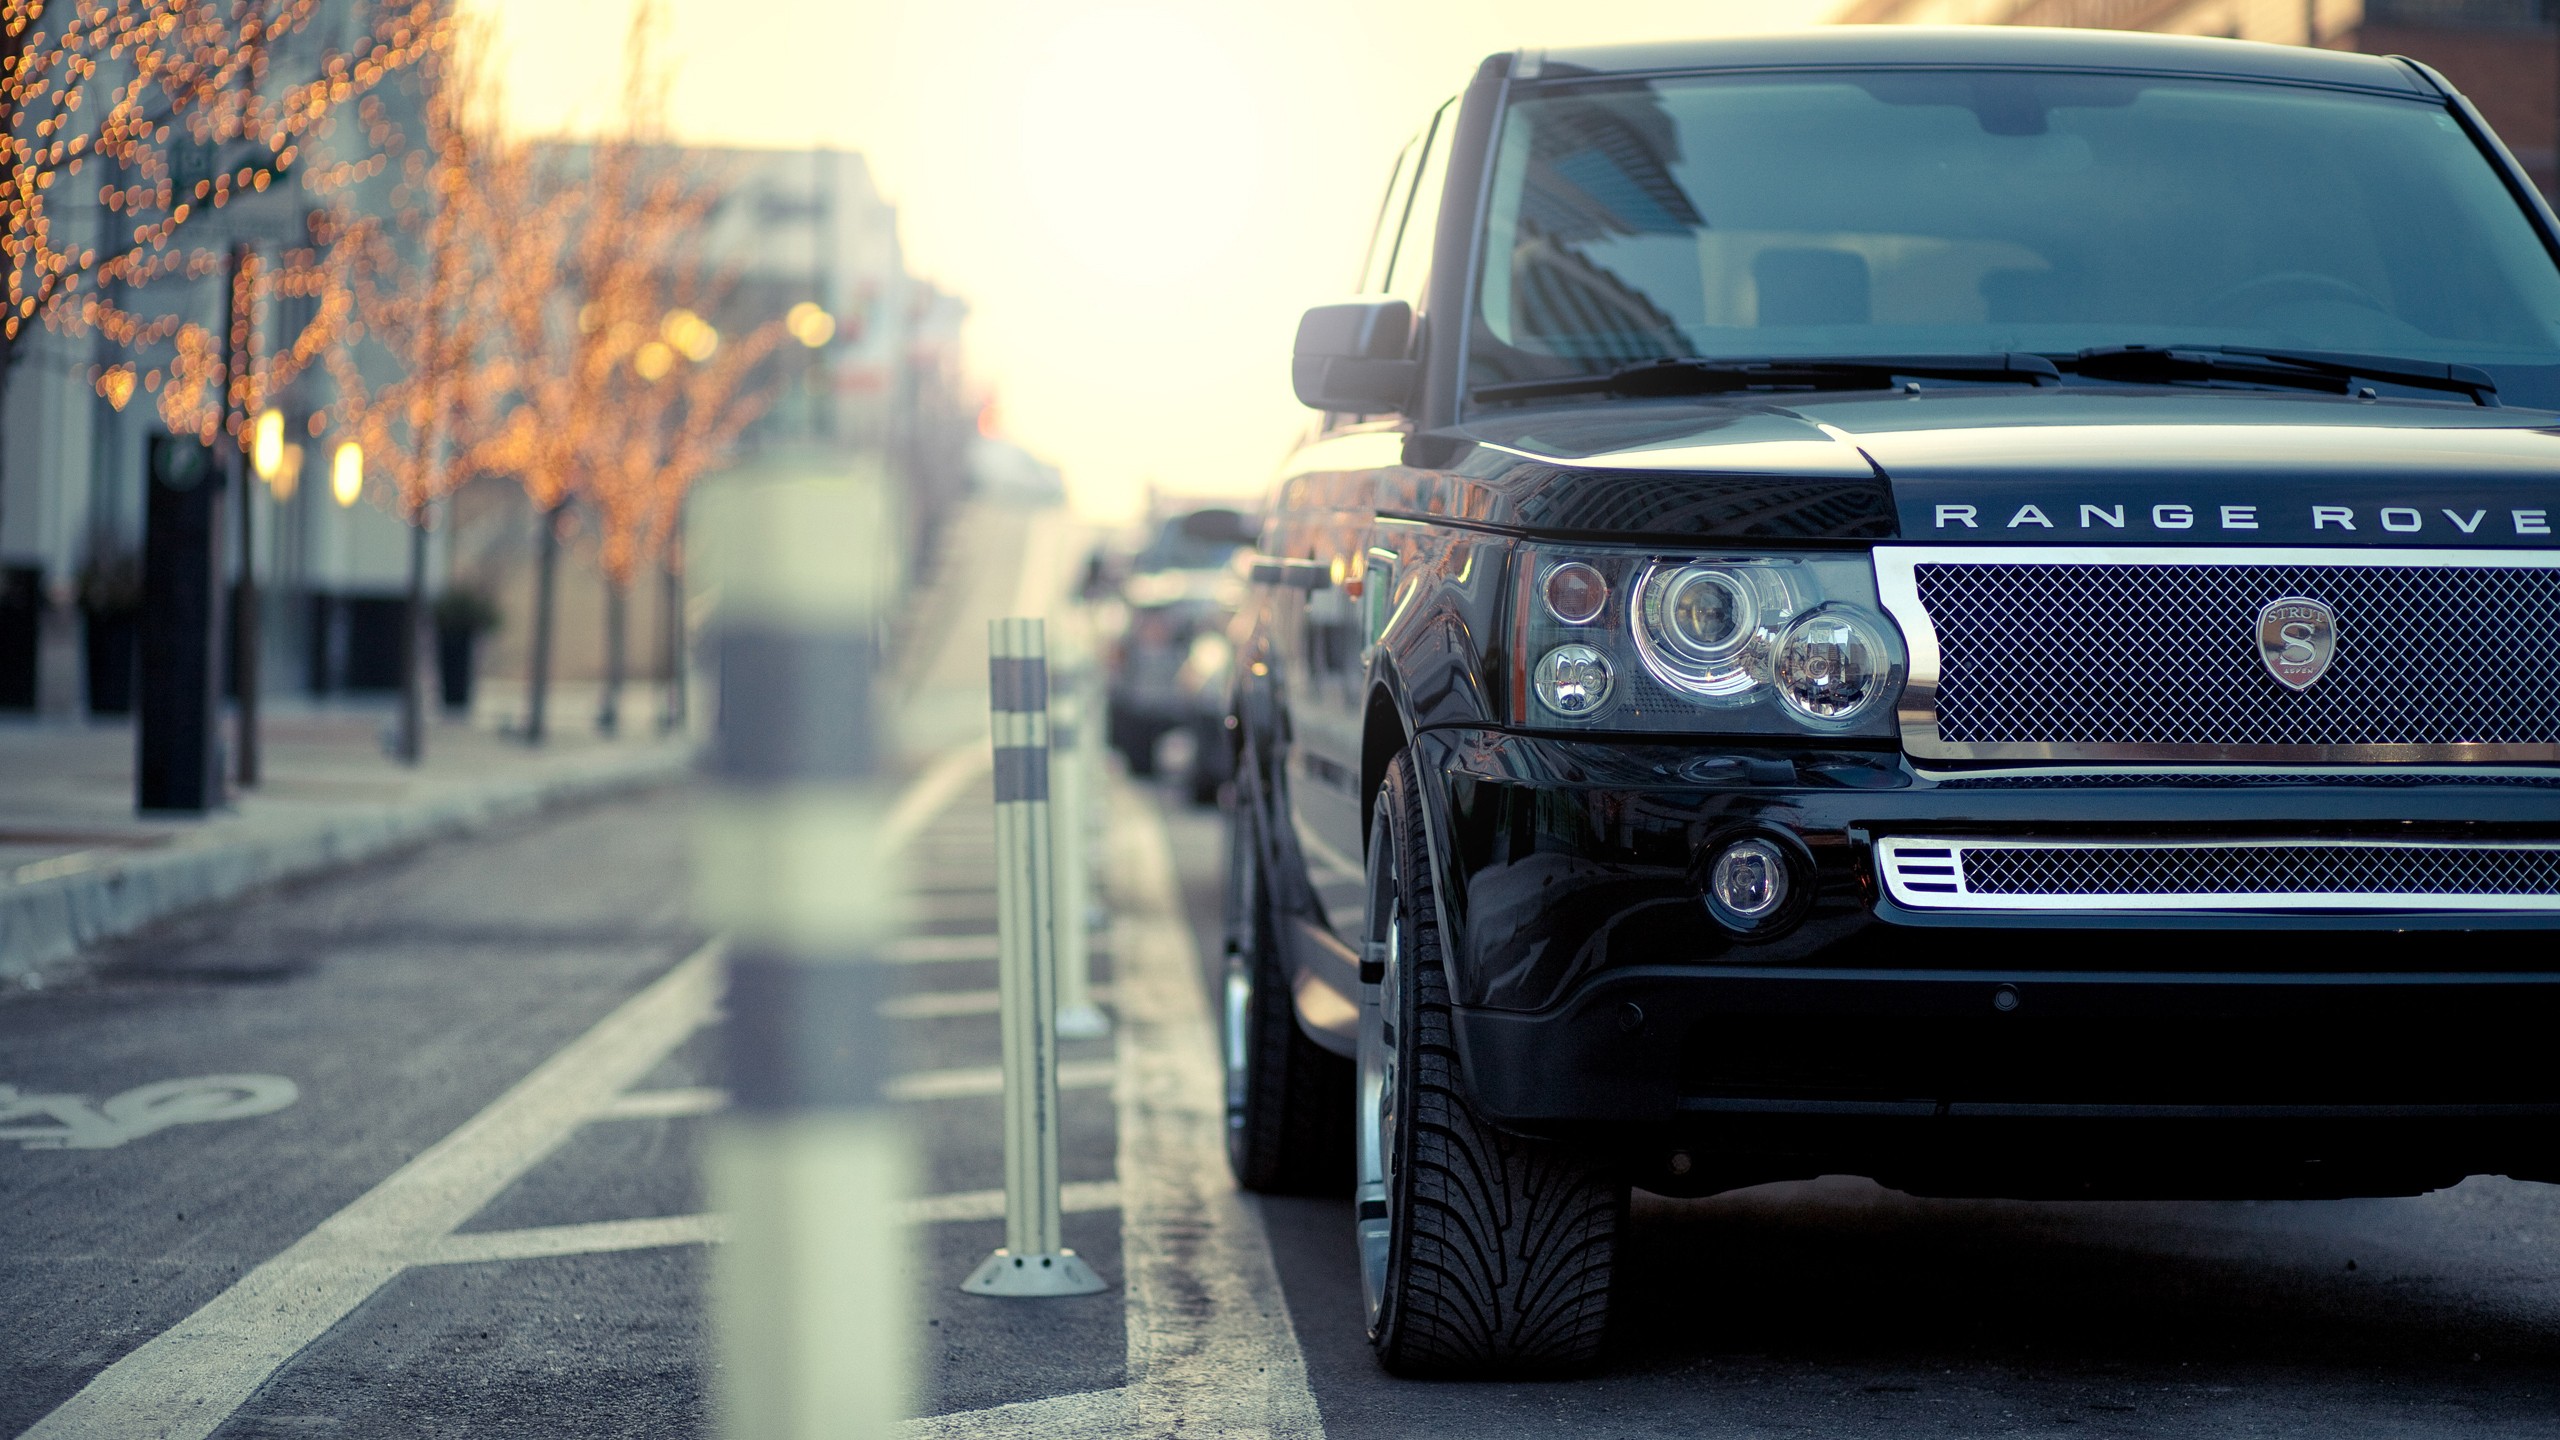 Download wallpaper for 1366x768 resolution | Range Rover SUV HD | cars |  Wallpaper Better